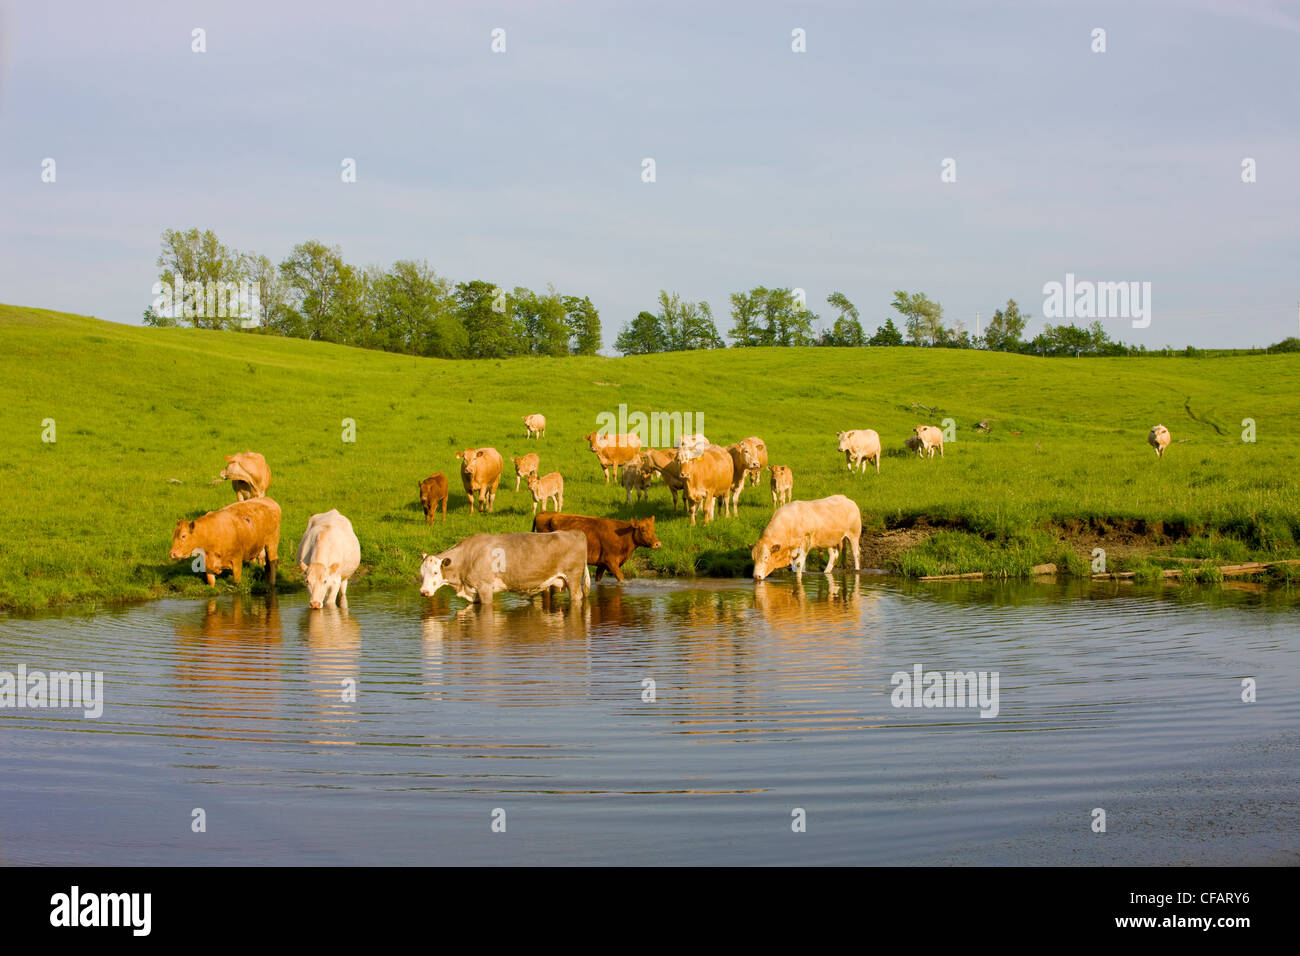 Cattle drinking from a pond near Millbrook, Ontario, Canada. Stock Photo